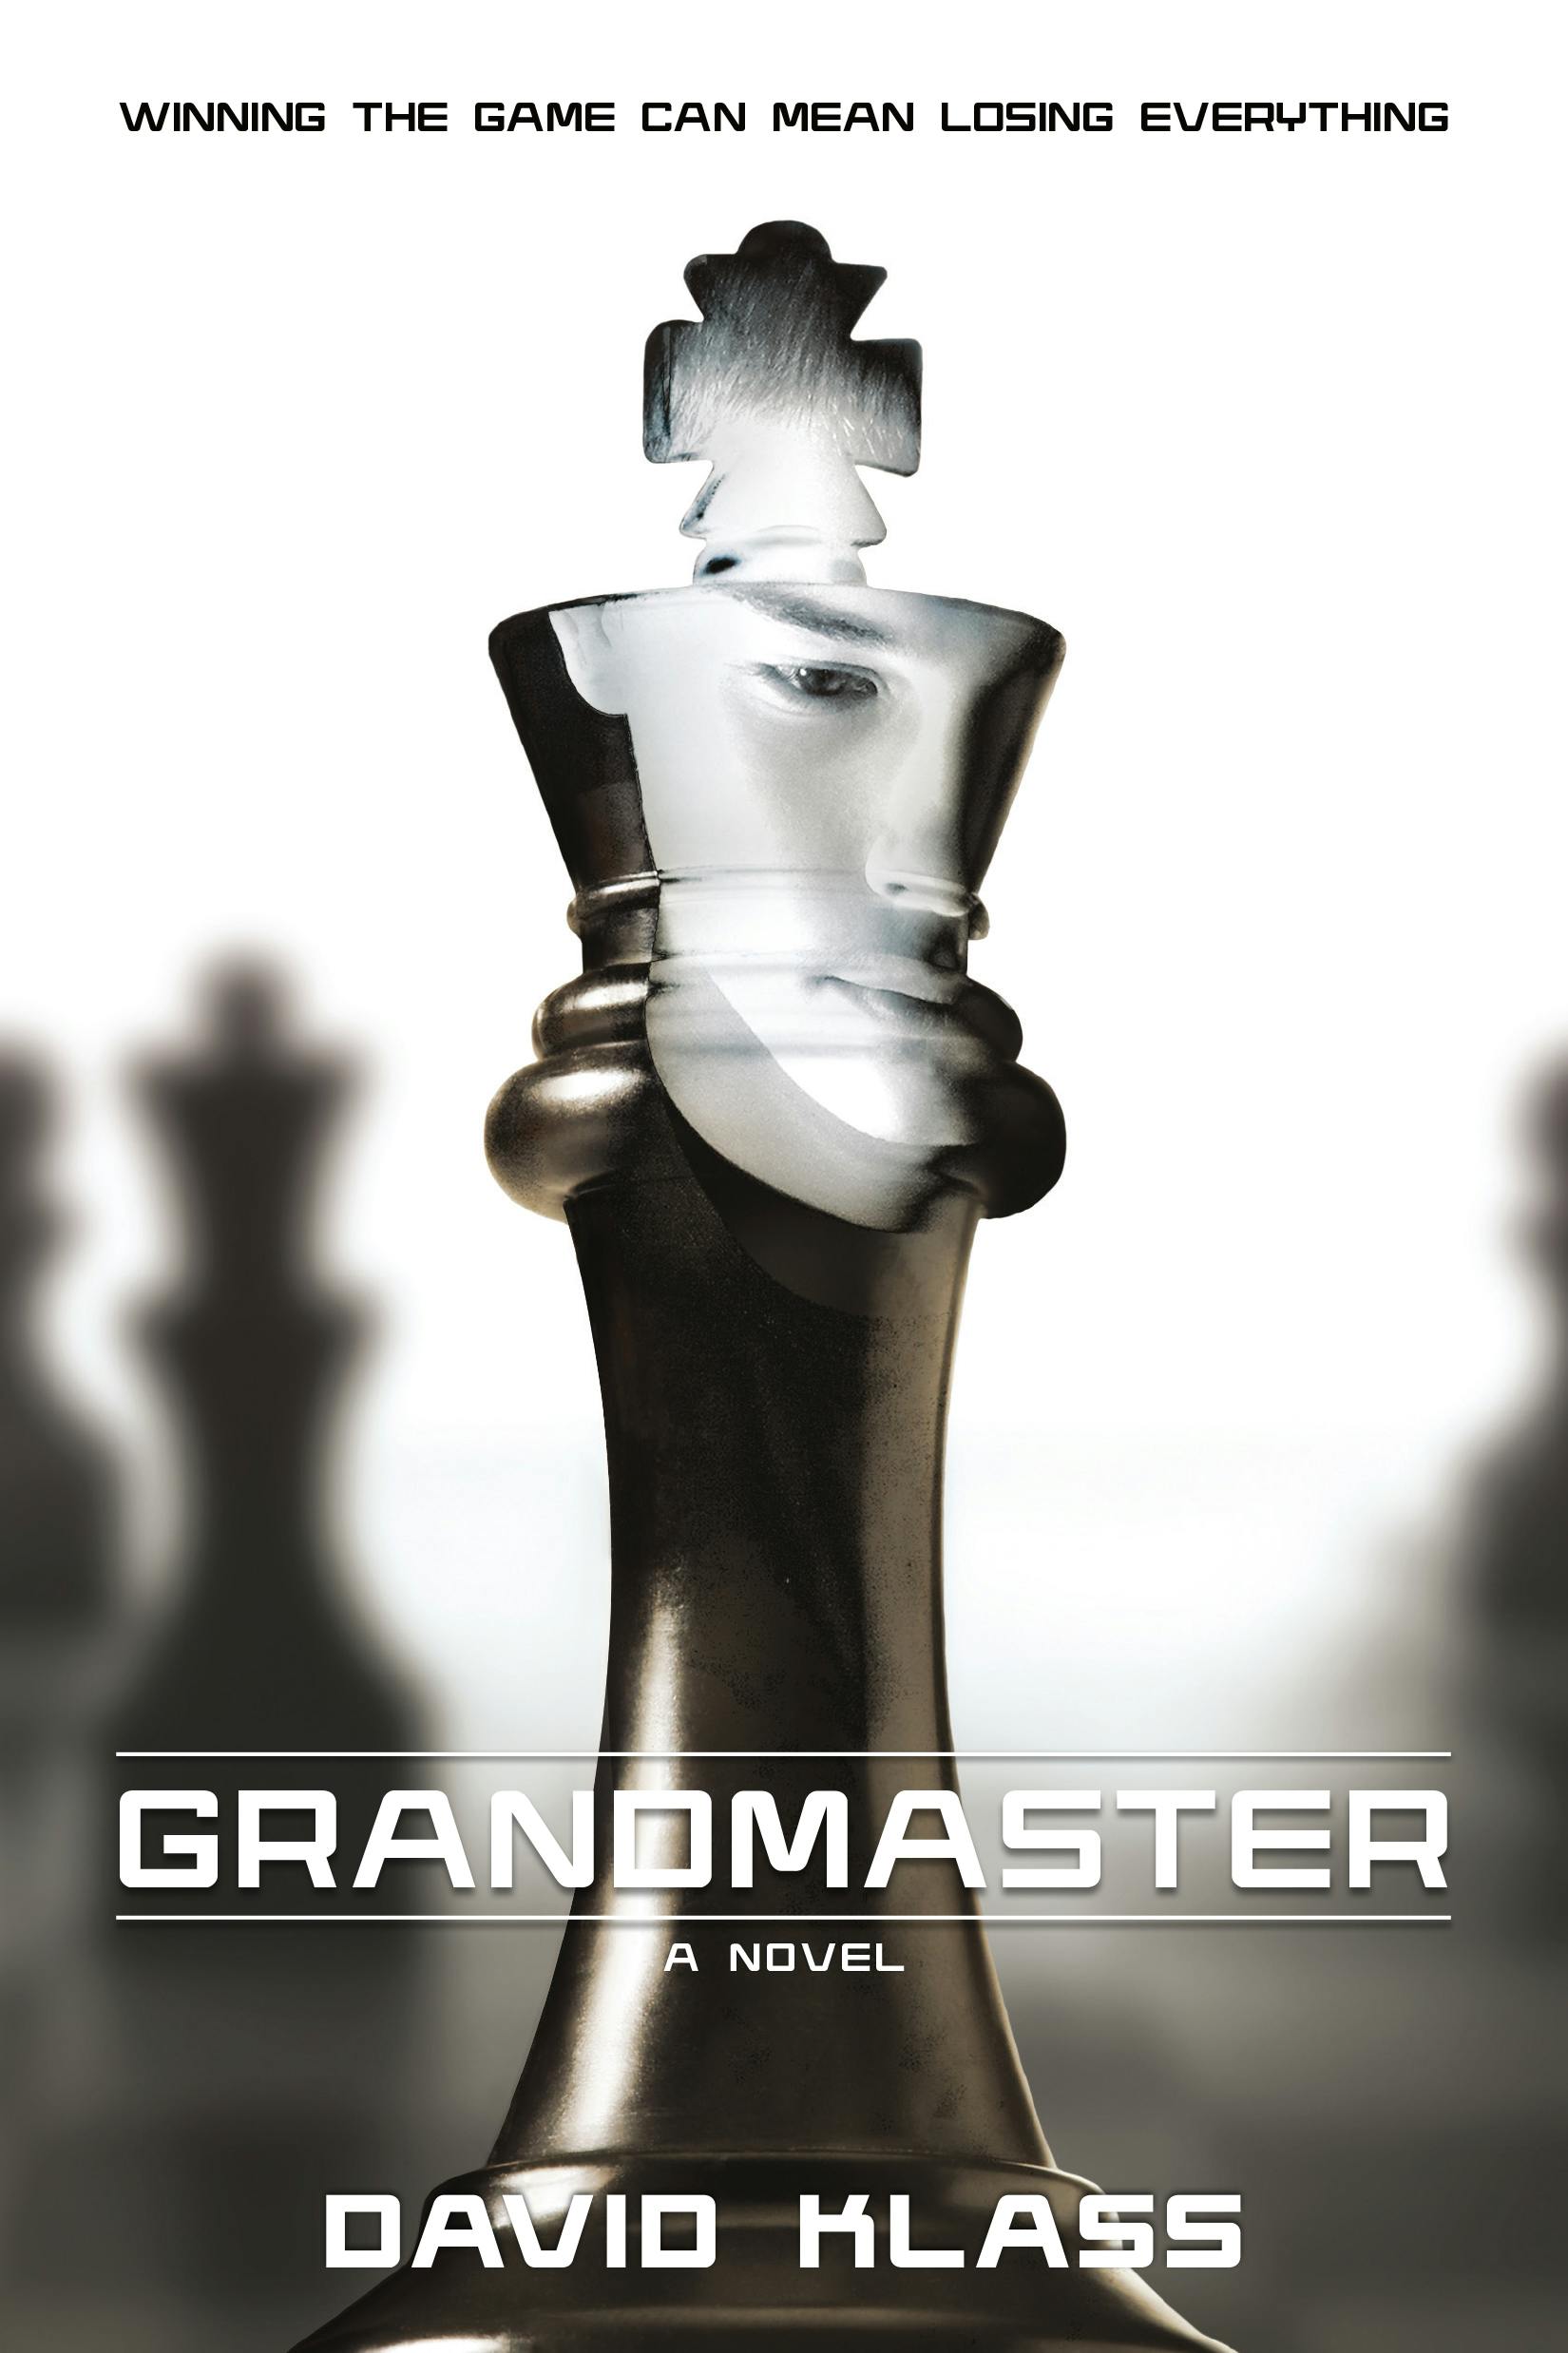 How to Stop Blunders: The Ultimate Grandmaster Guide